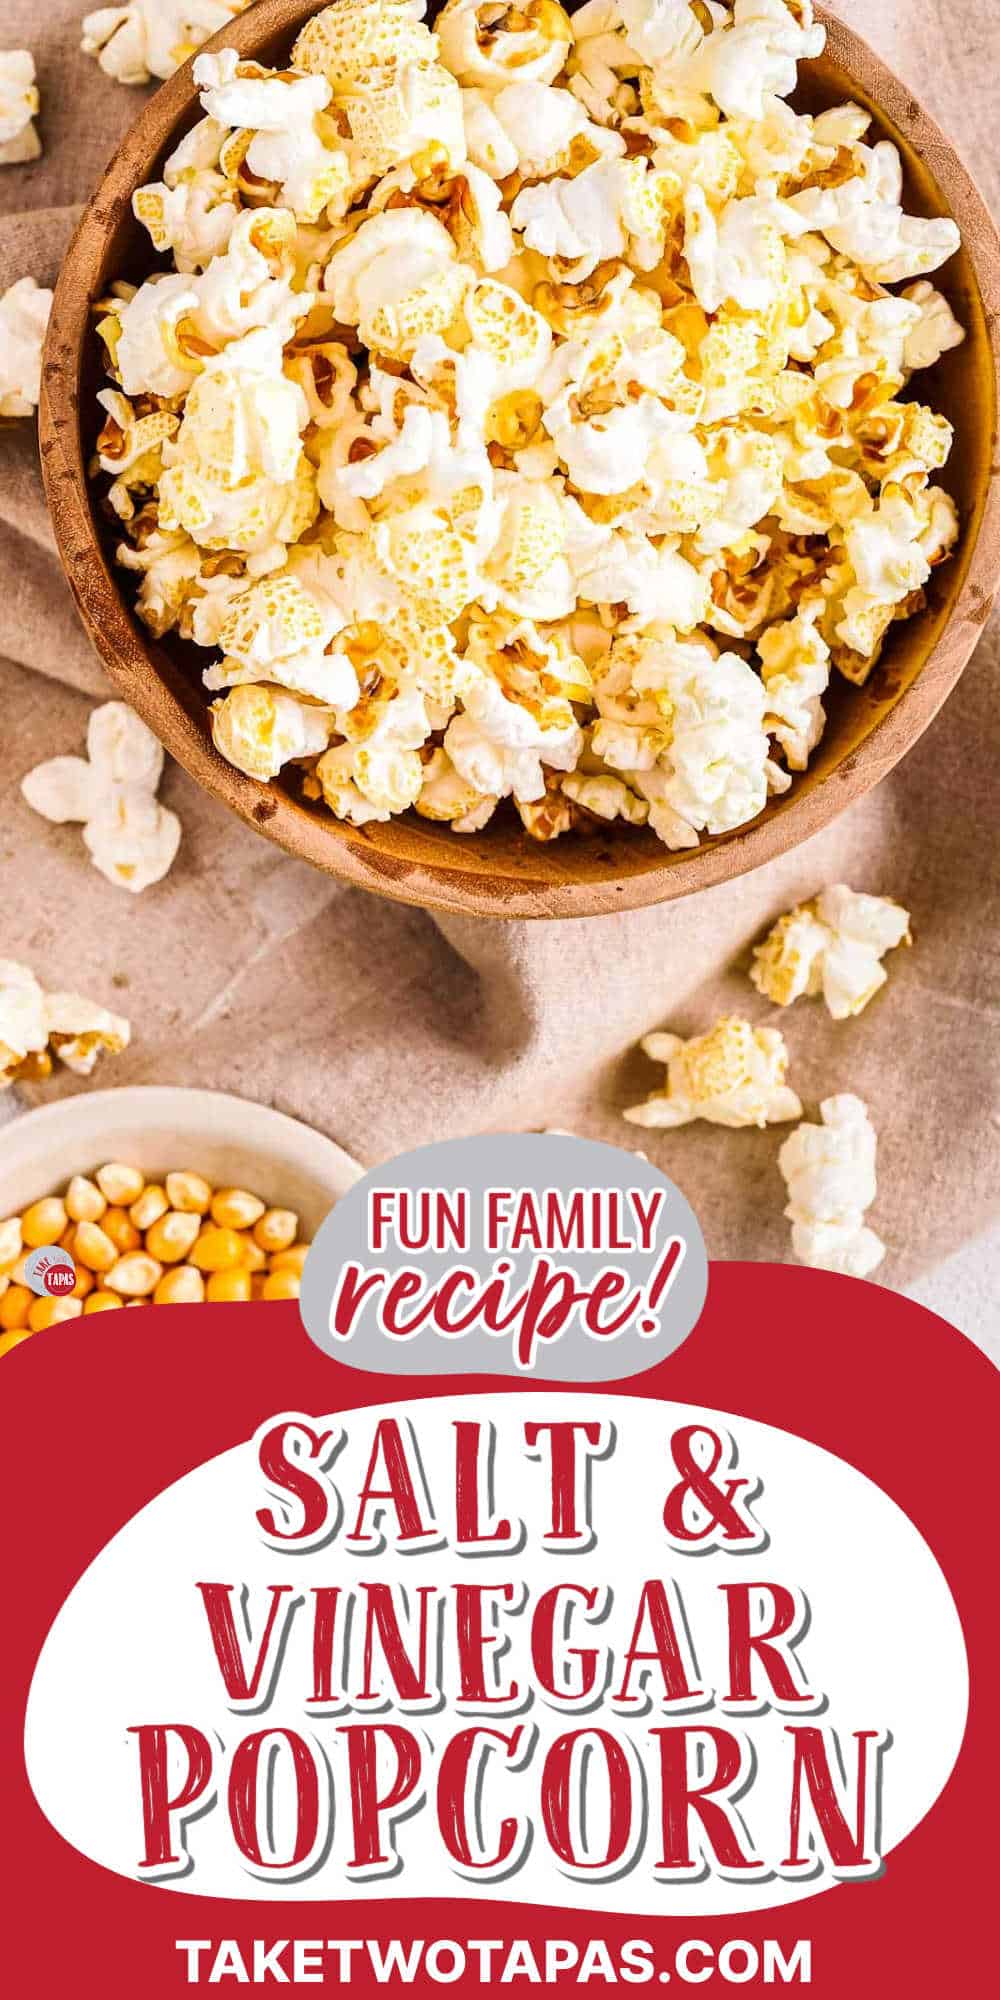 salt and vinegar popcorn with a red banner and text